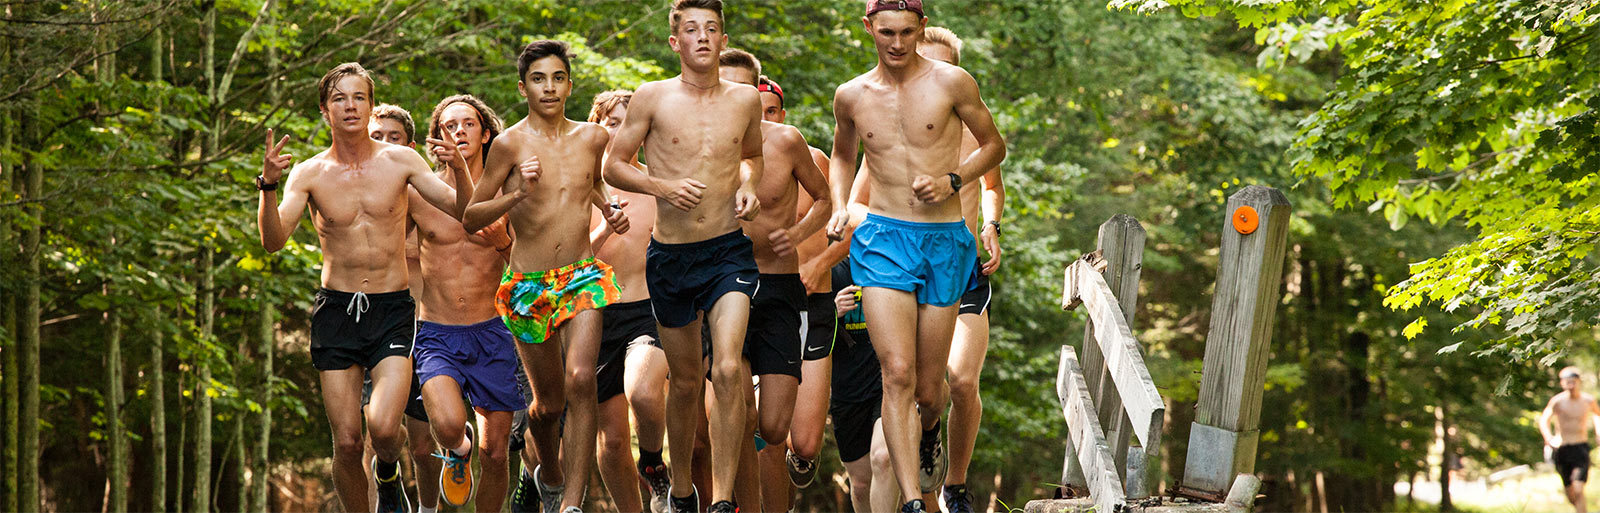 Nike Cross Country Running Camps - Five 